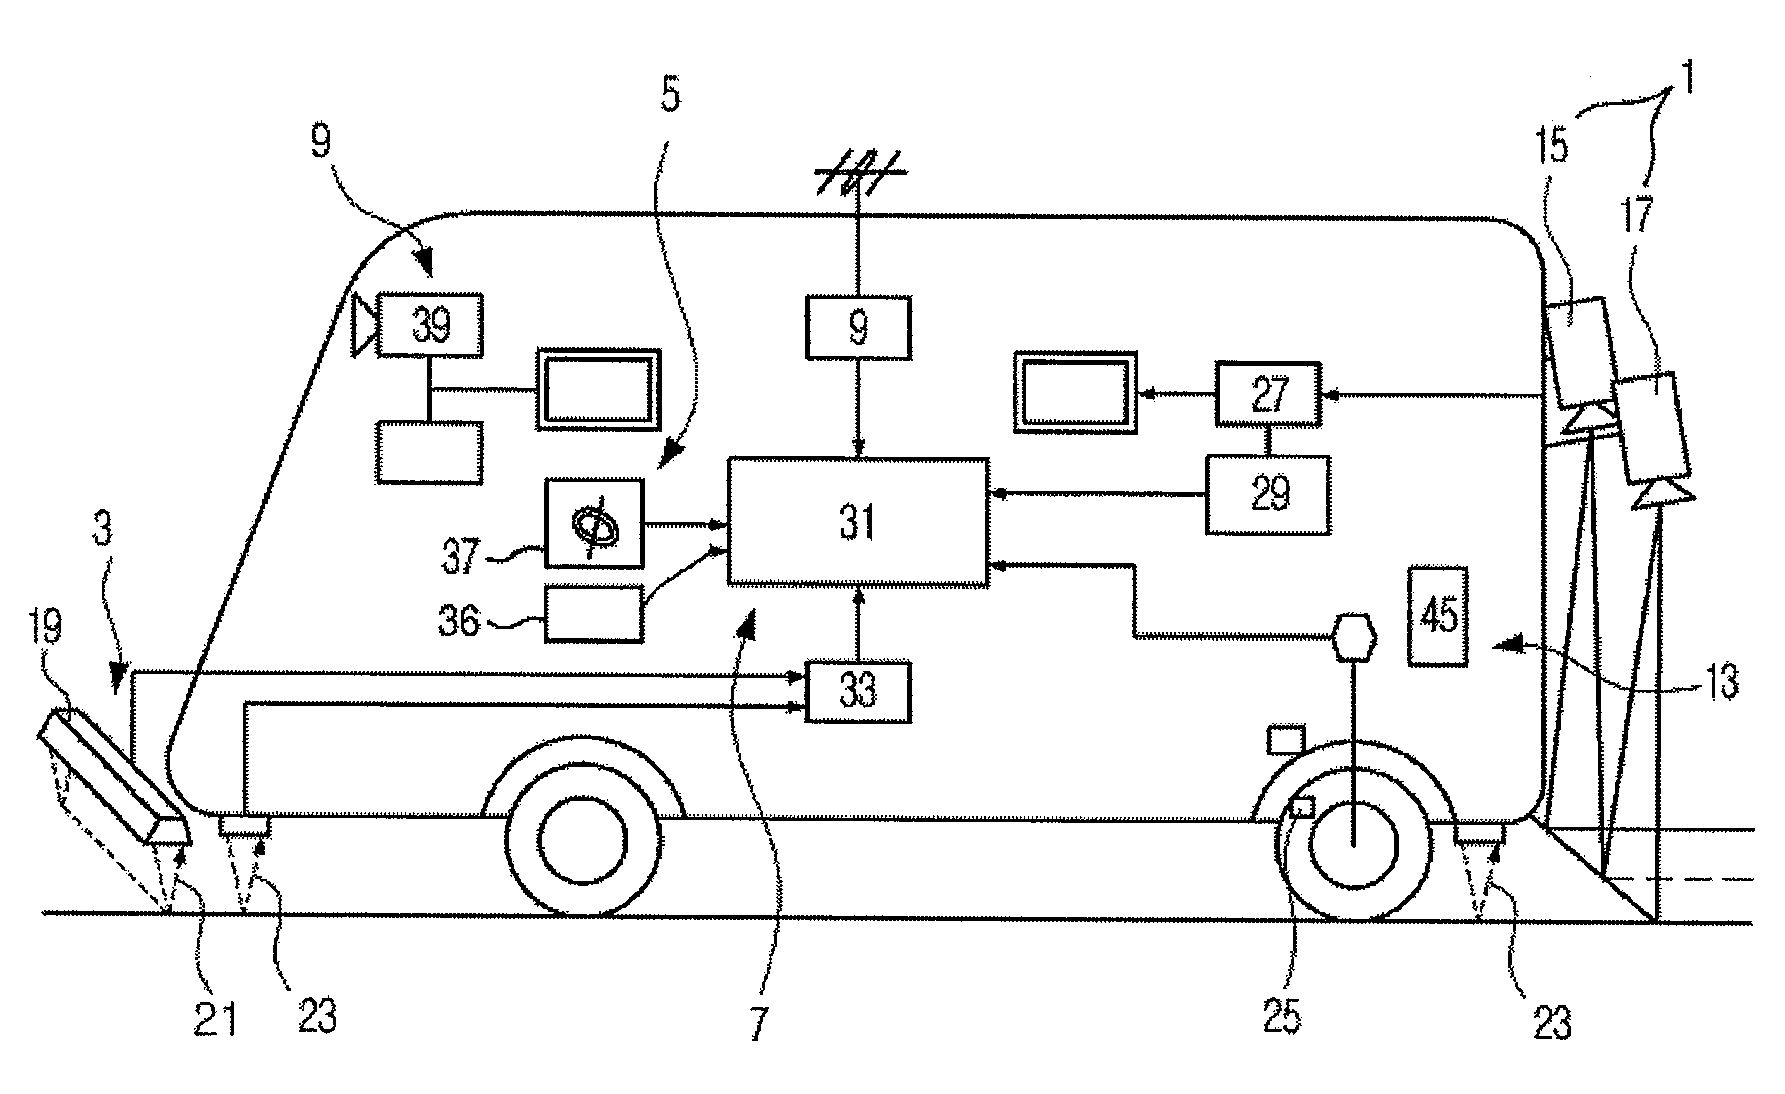 Apparatus for automatically inspecting road surface pavement condition